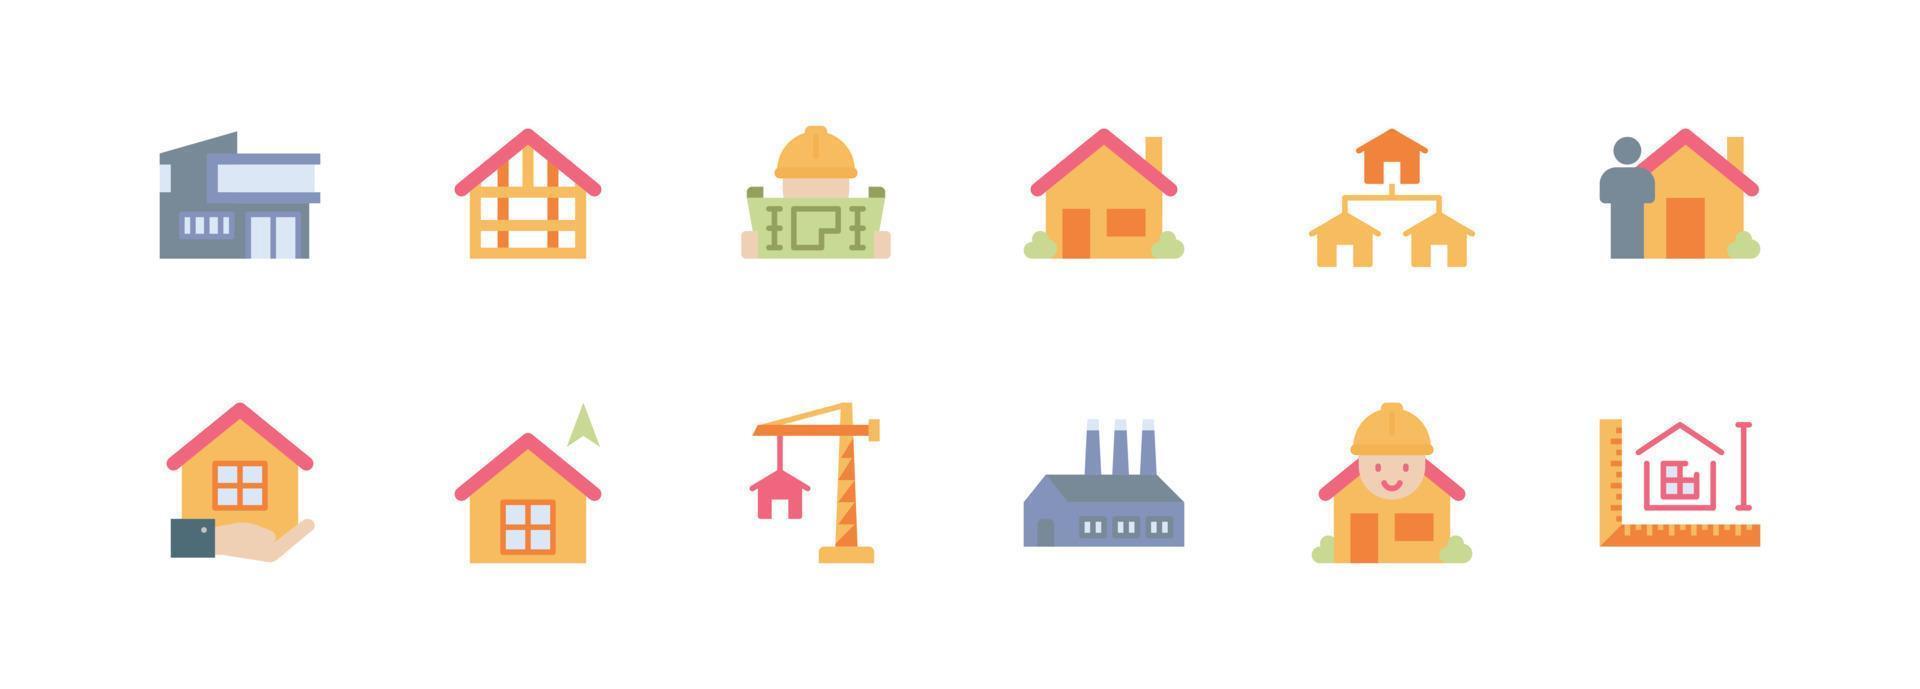 Model House Line Icons Vector Illustration , Building , Home , Residential House